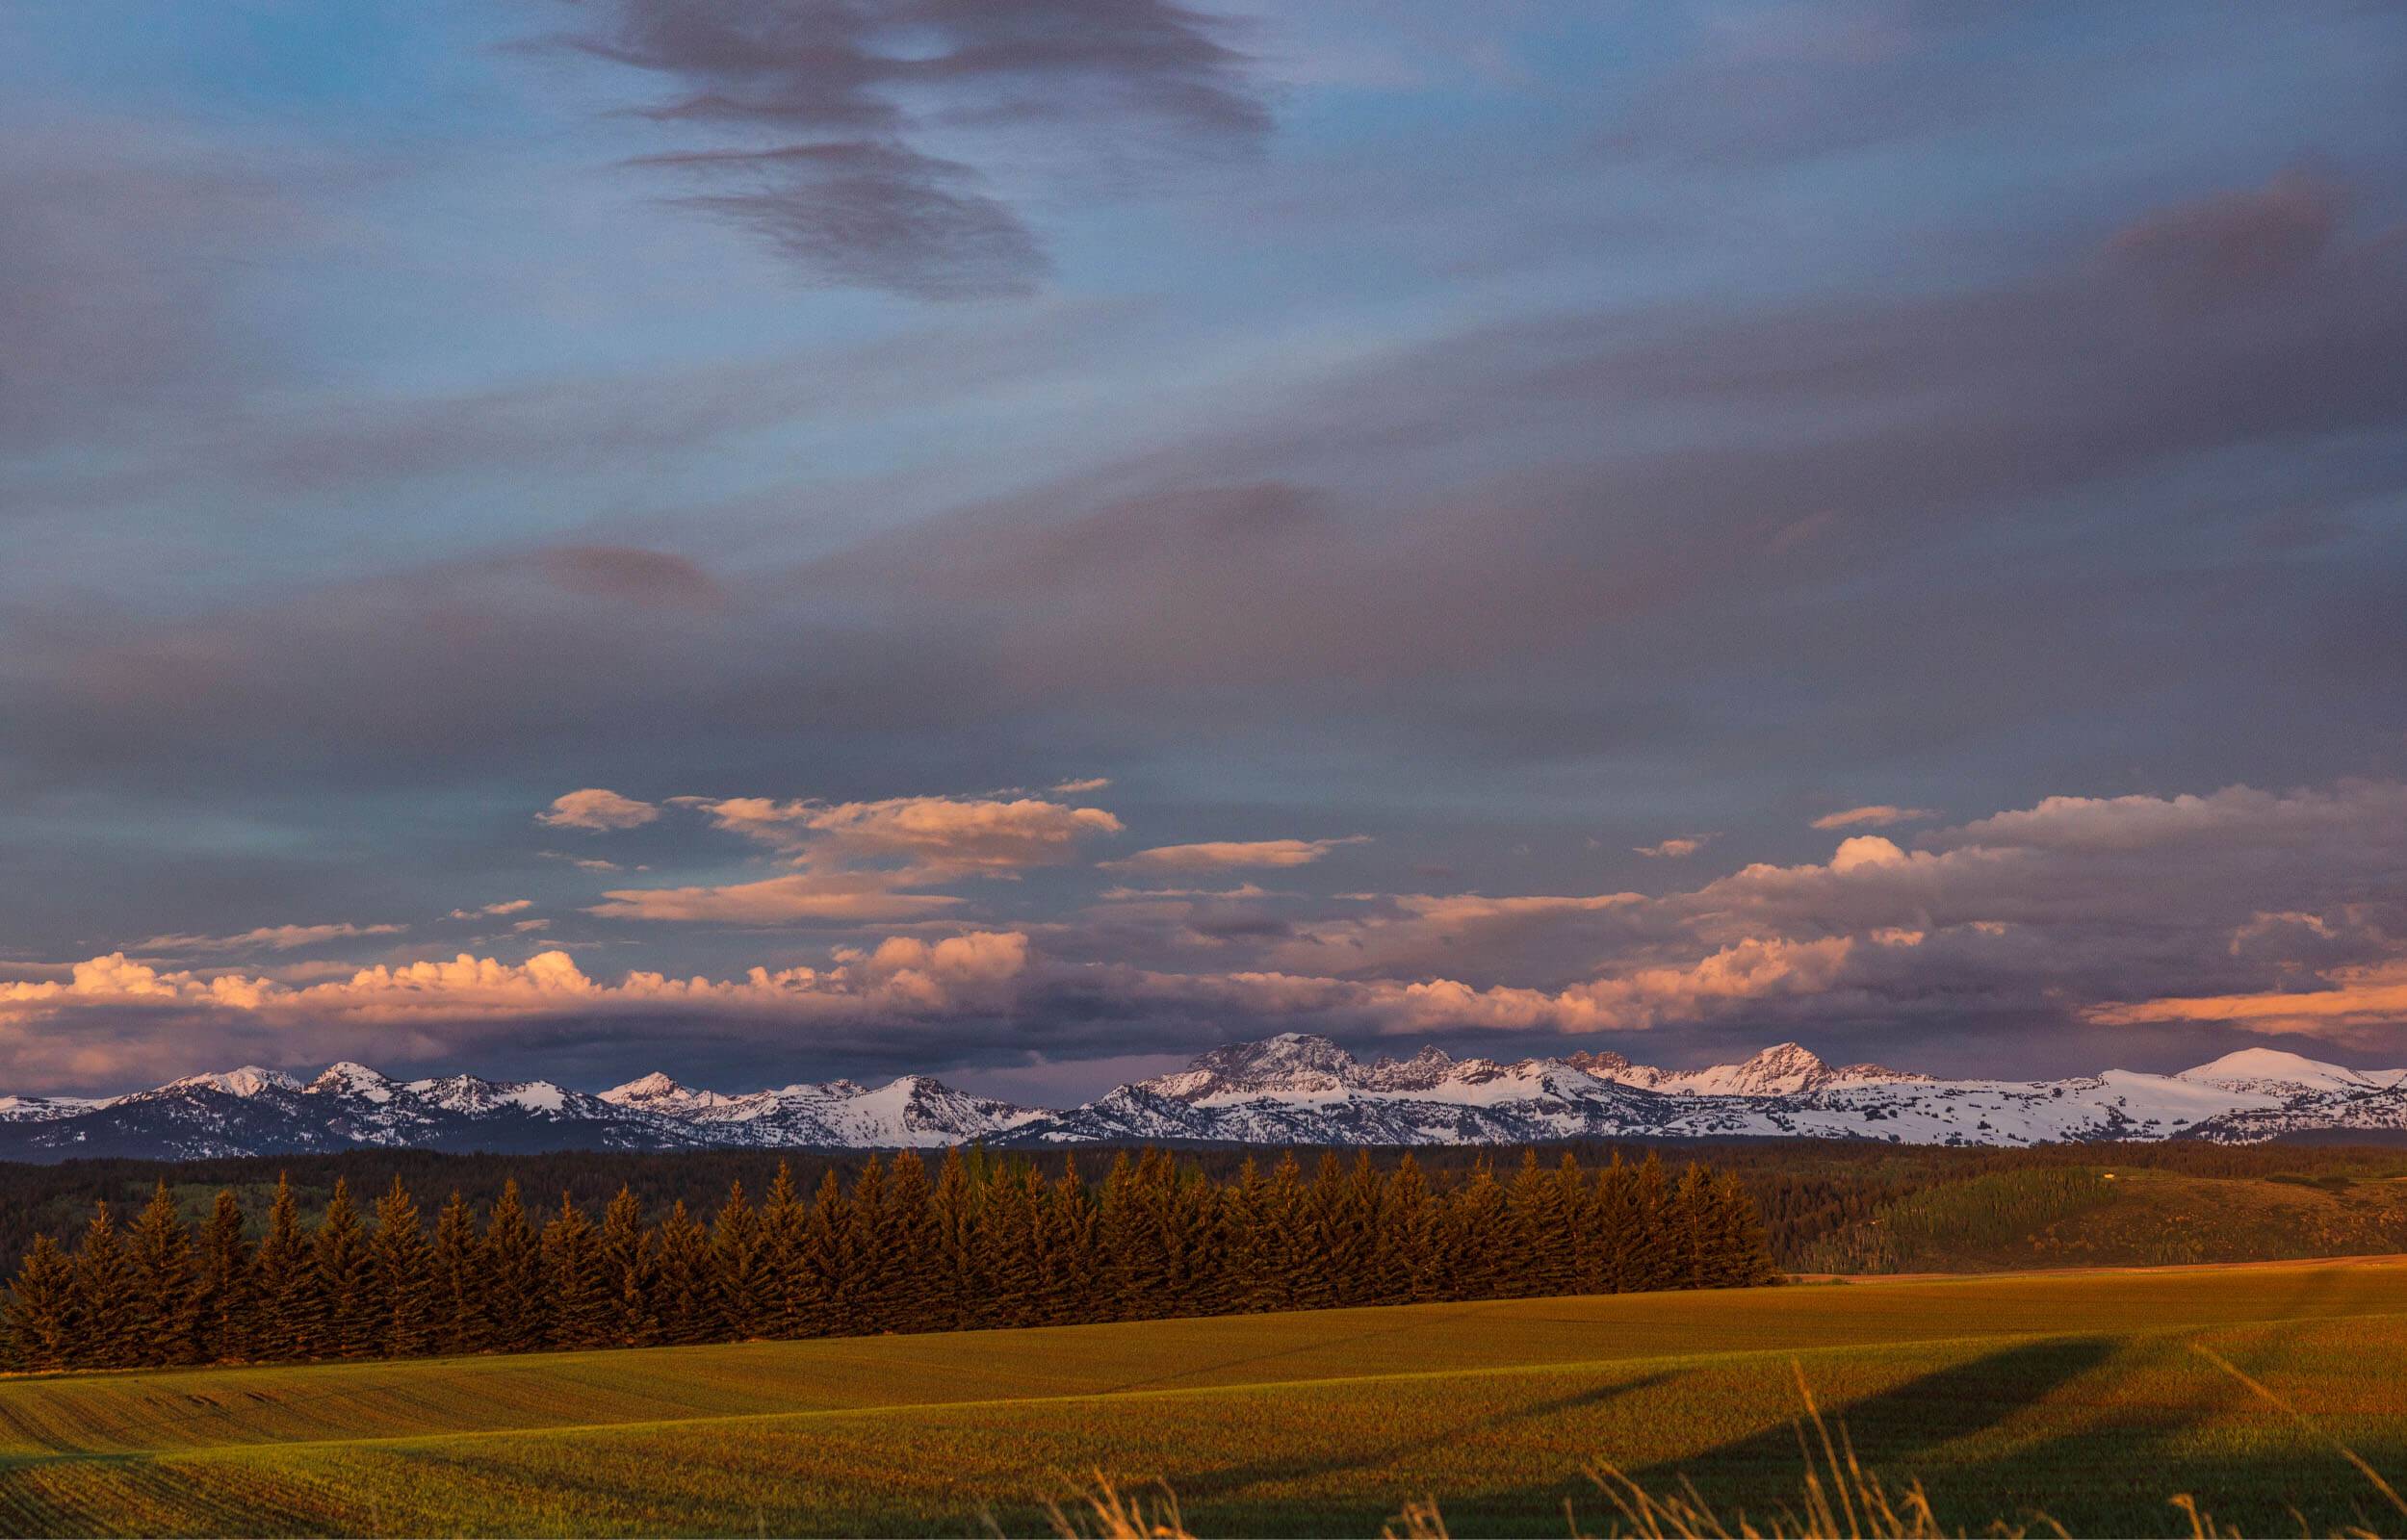 View of the Teton Mountains at sunset.